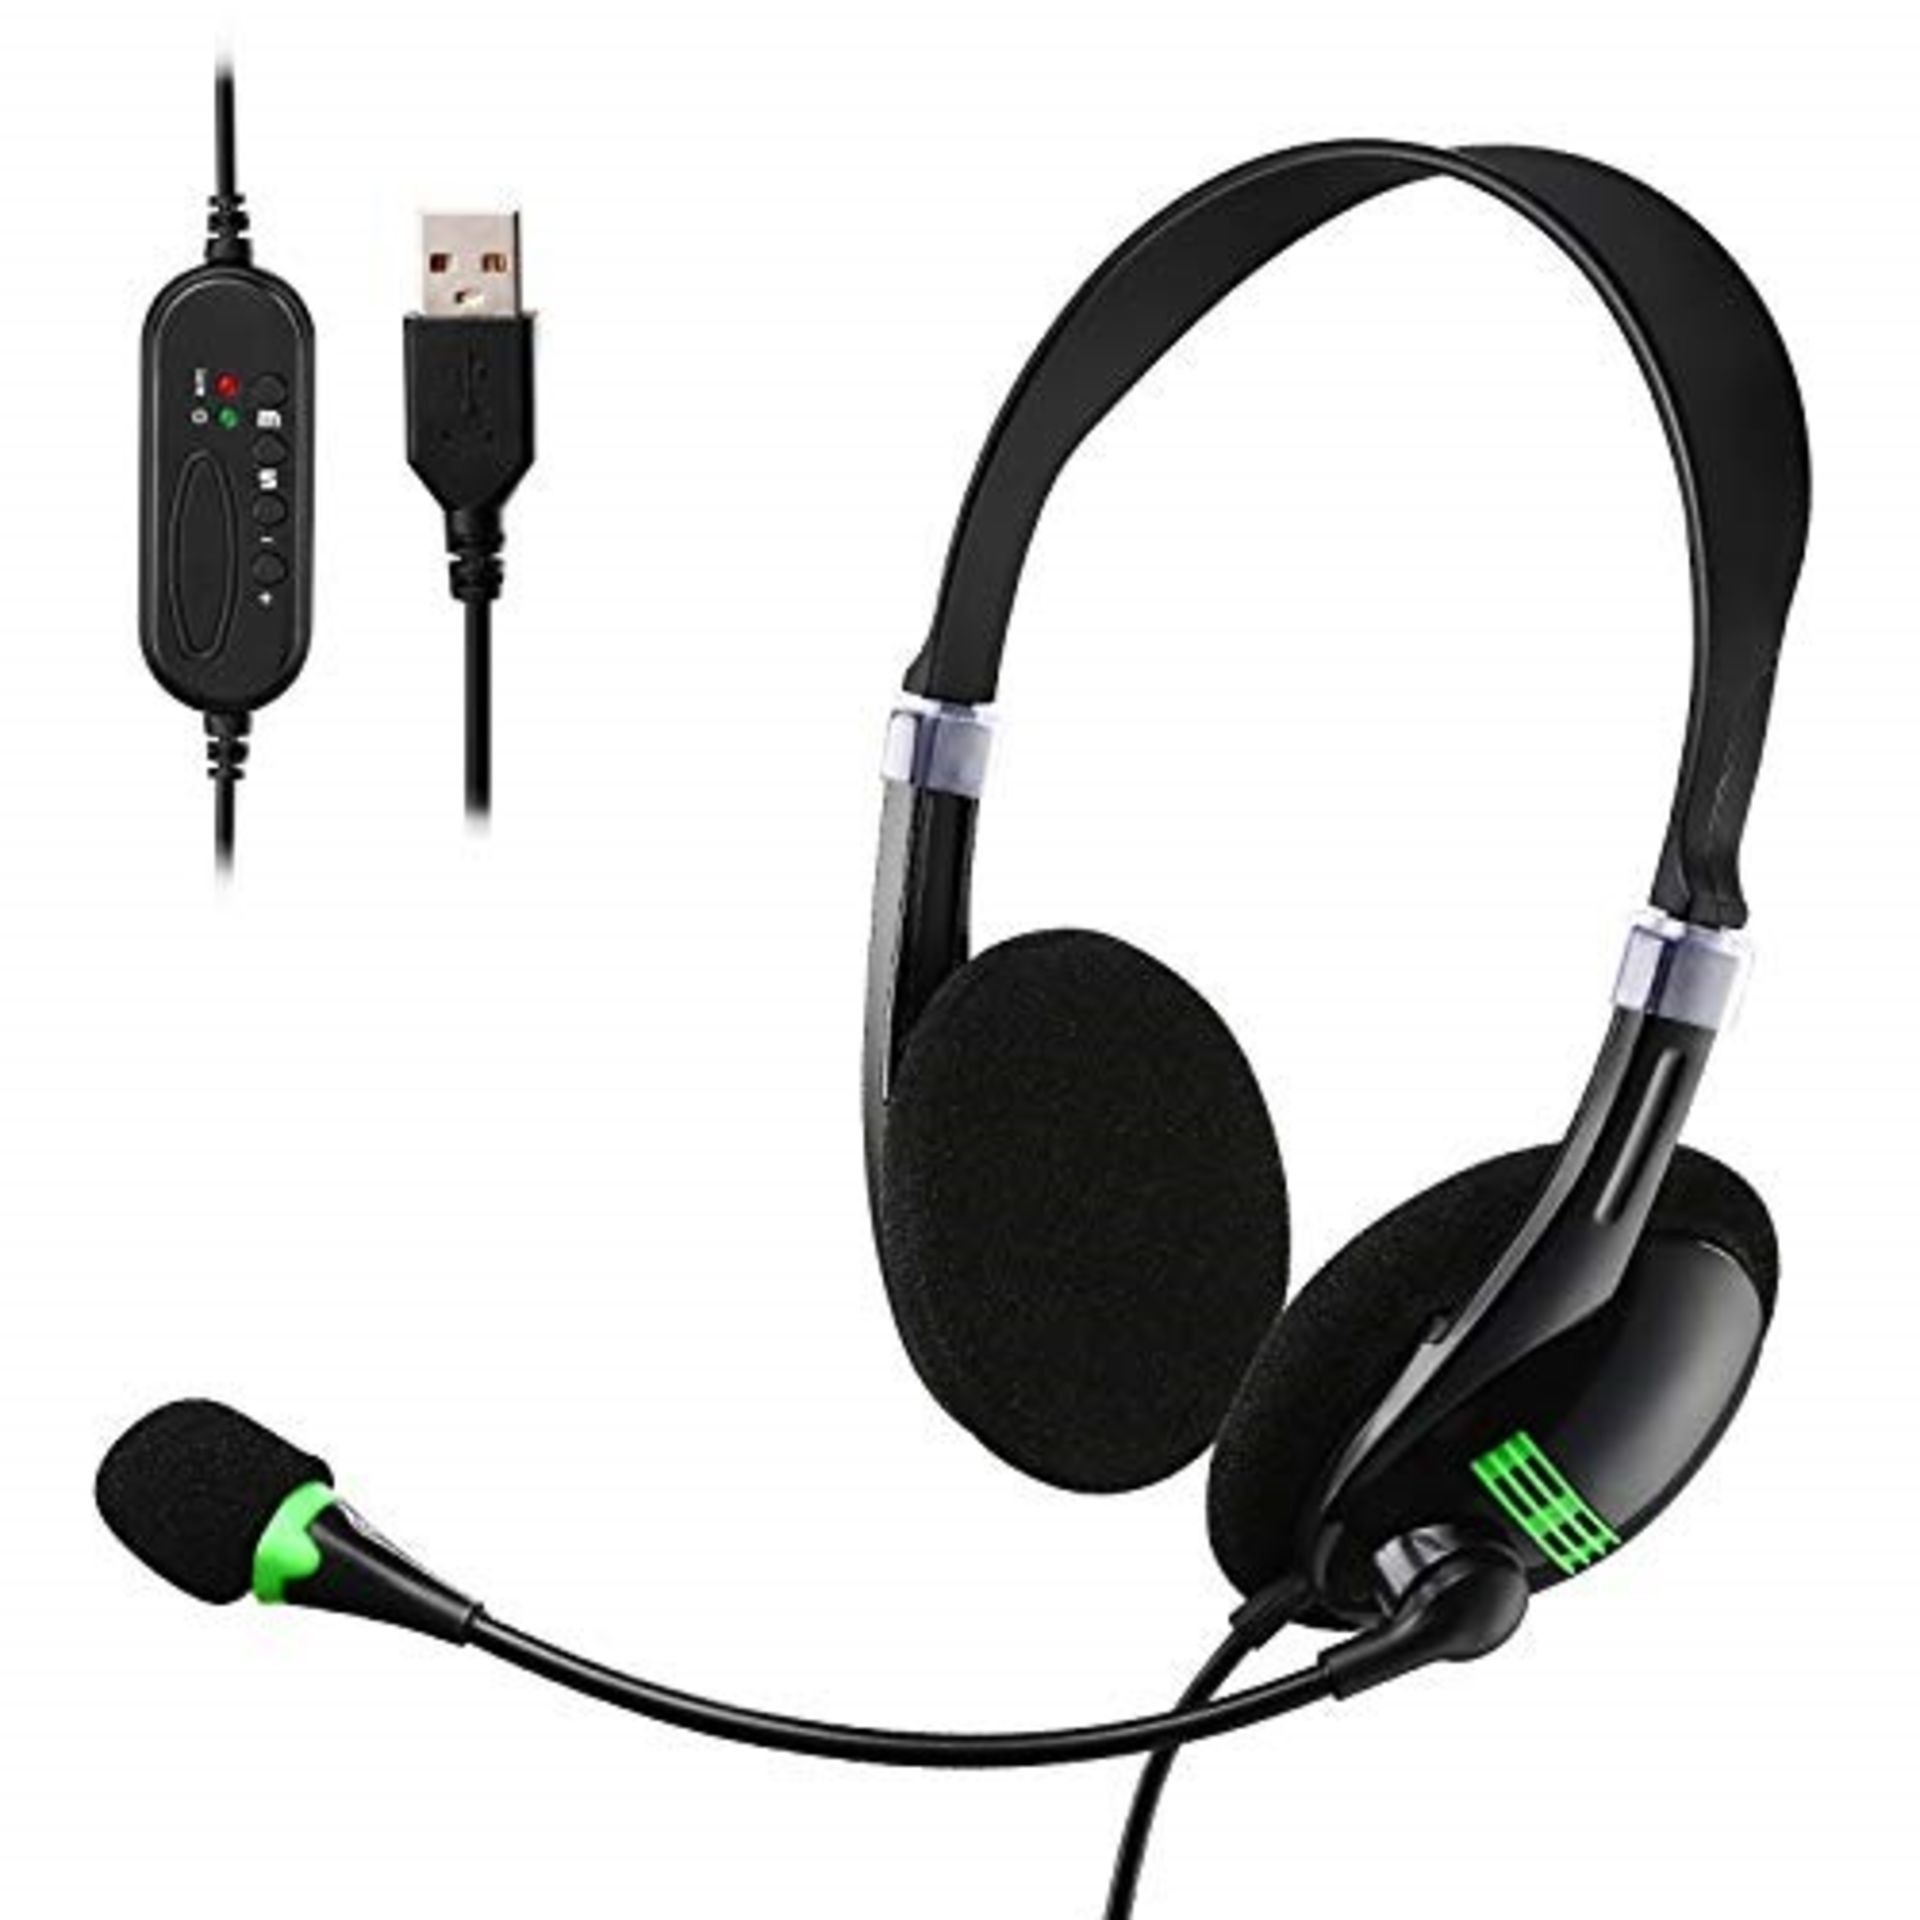 USB Headset PC USB Headsets with Microphone Noise Cancelling, Stereo PC Headphone for